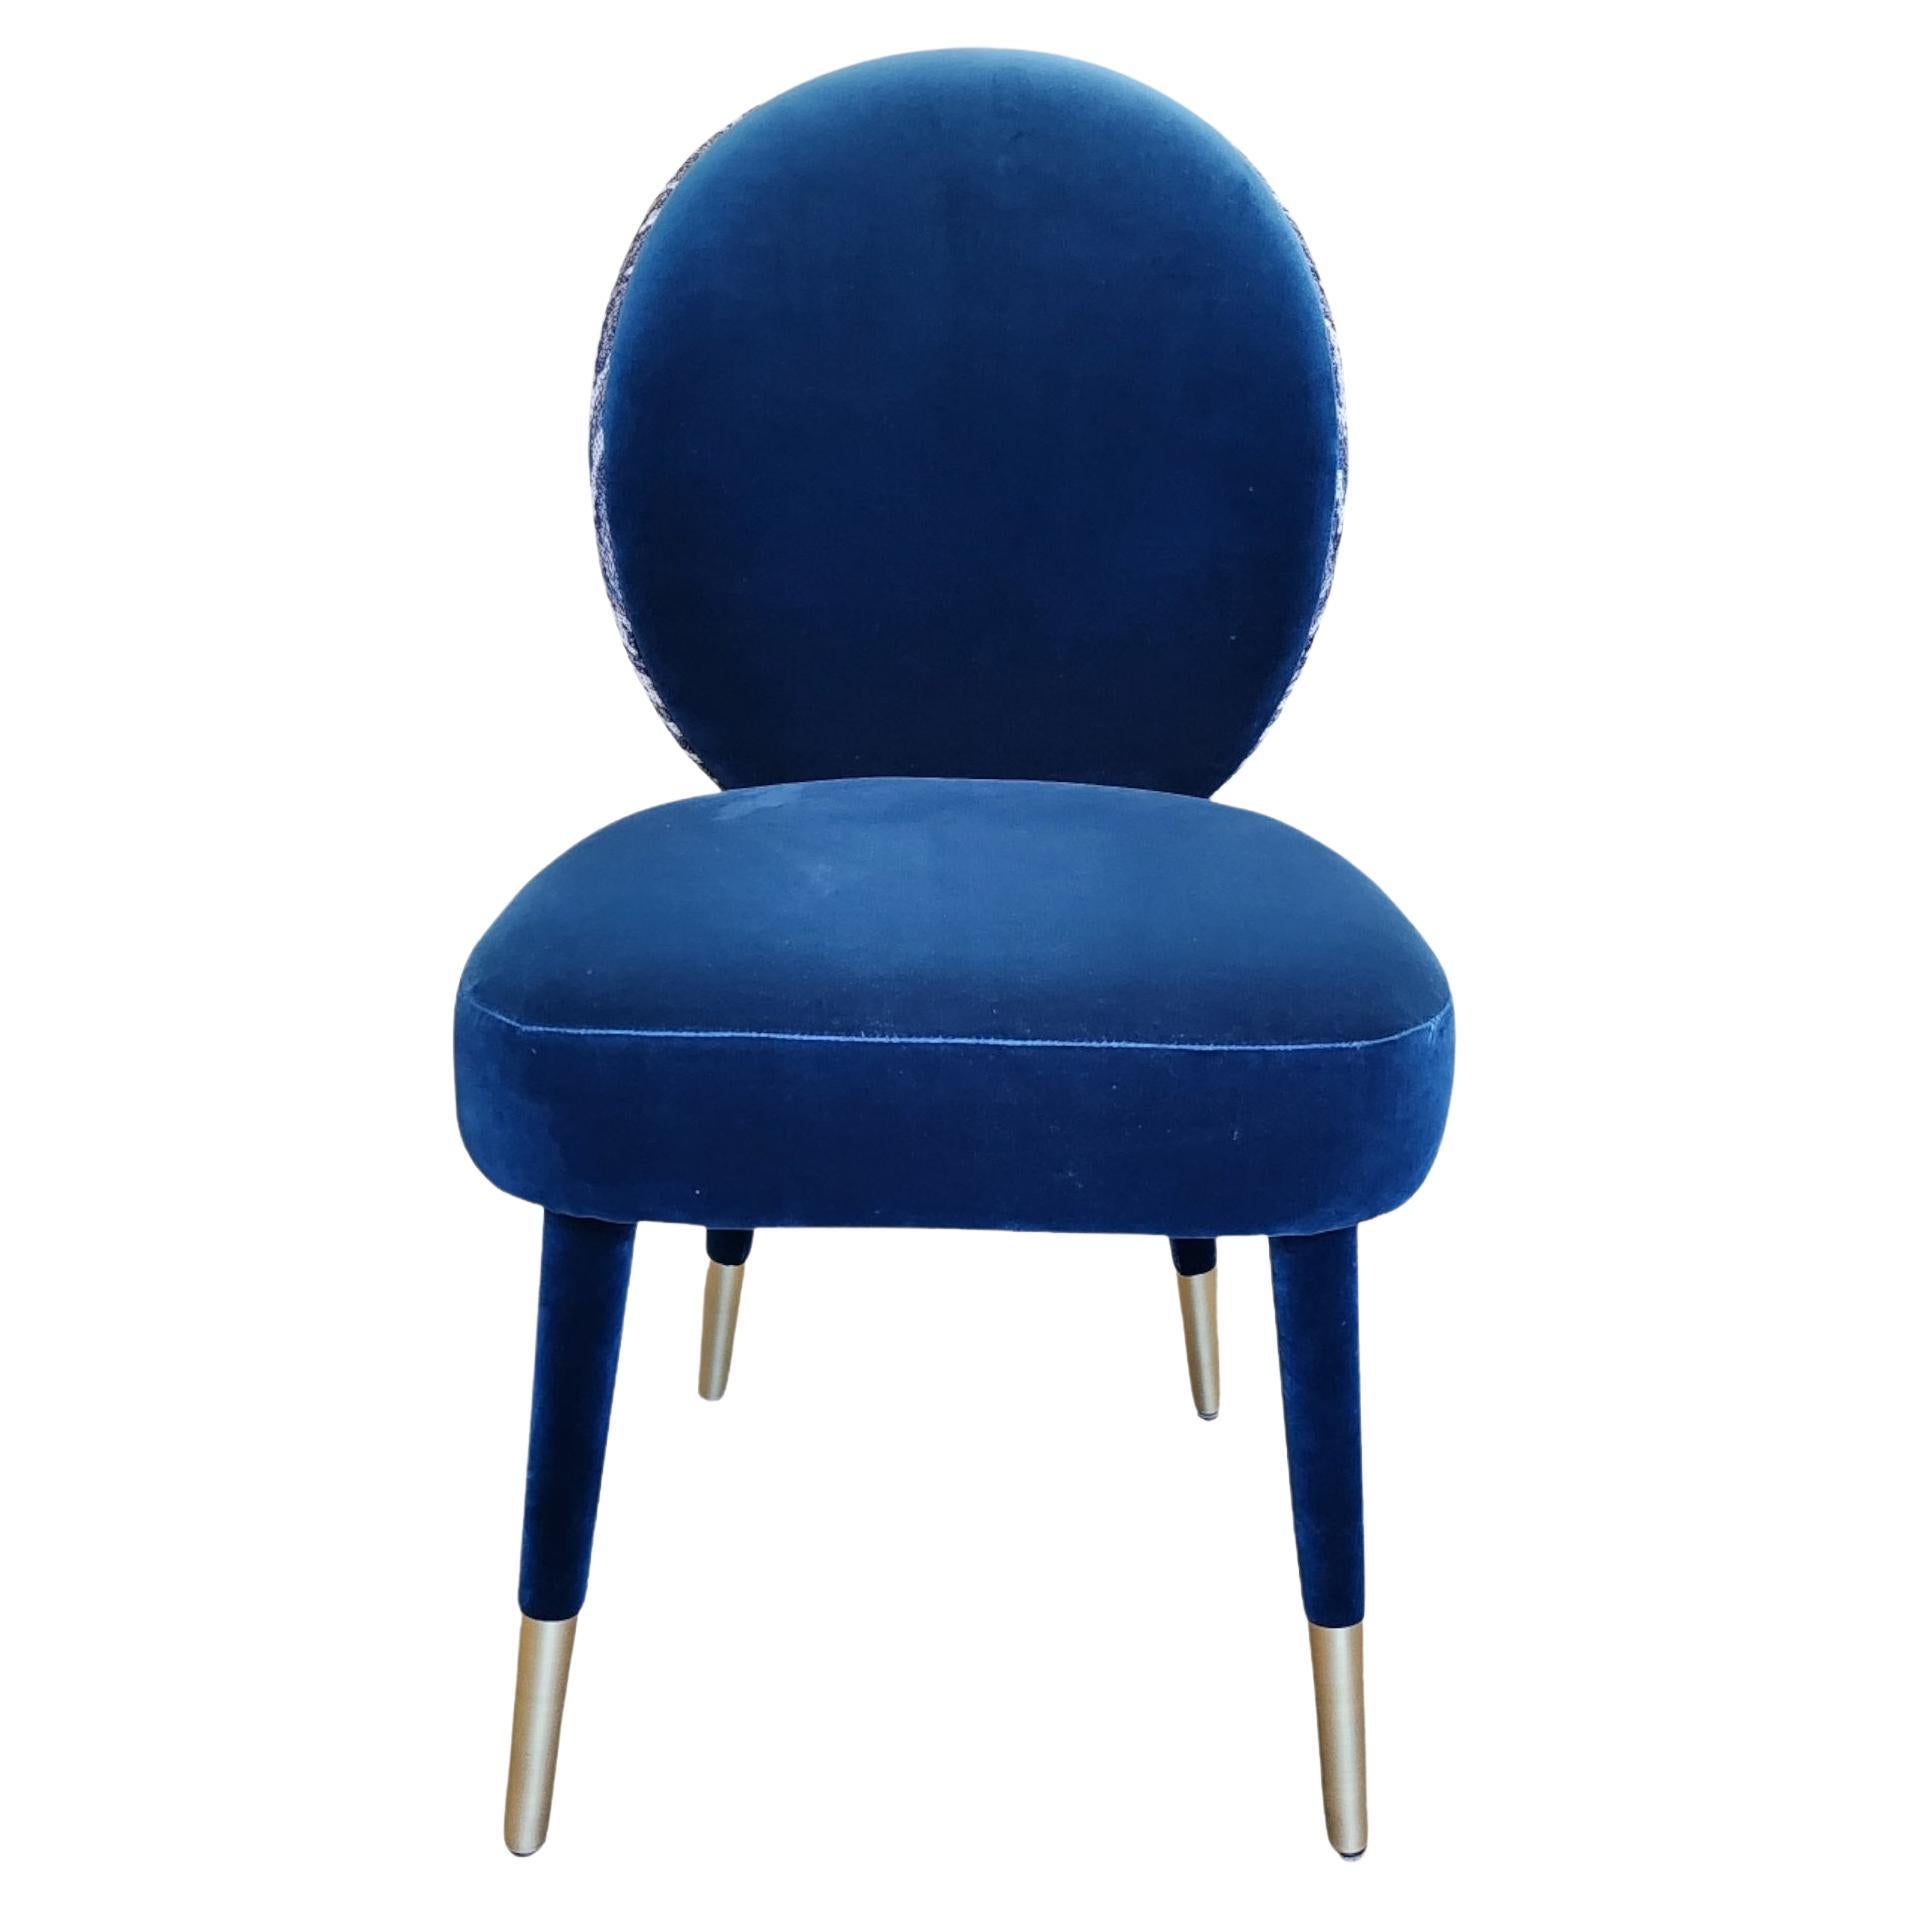 Dining chair with upholstered seat, back and legs.
Shown in Velvet.
Price is in one solid velvet.
Legs can also be made in wood stained finish.
Brass finish or chrome finish sabots, polished or brushed.
Can be customized to your specifications or